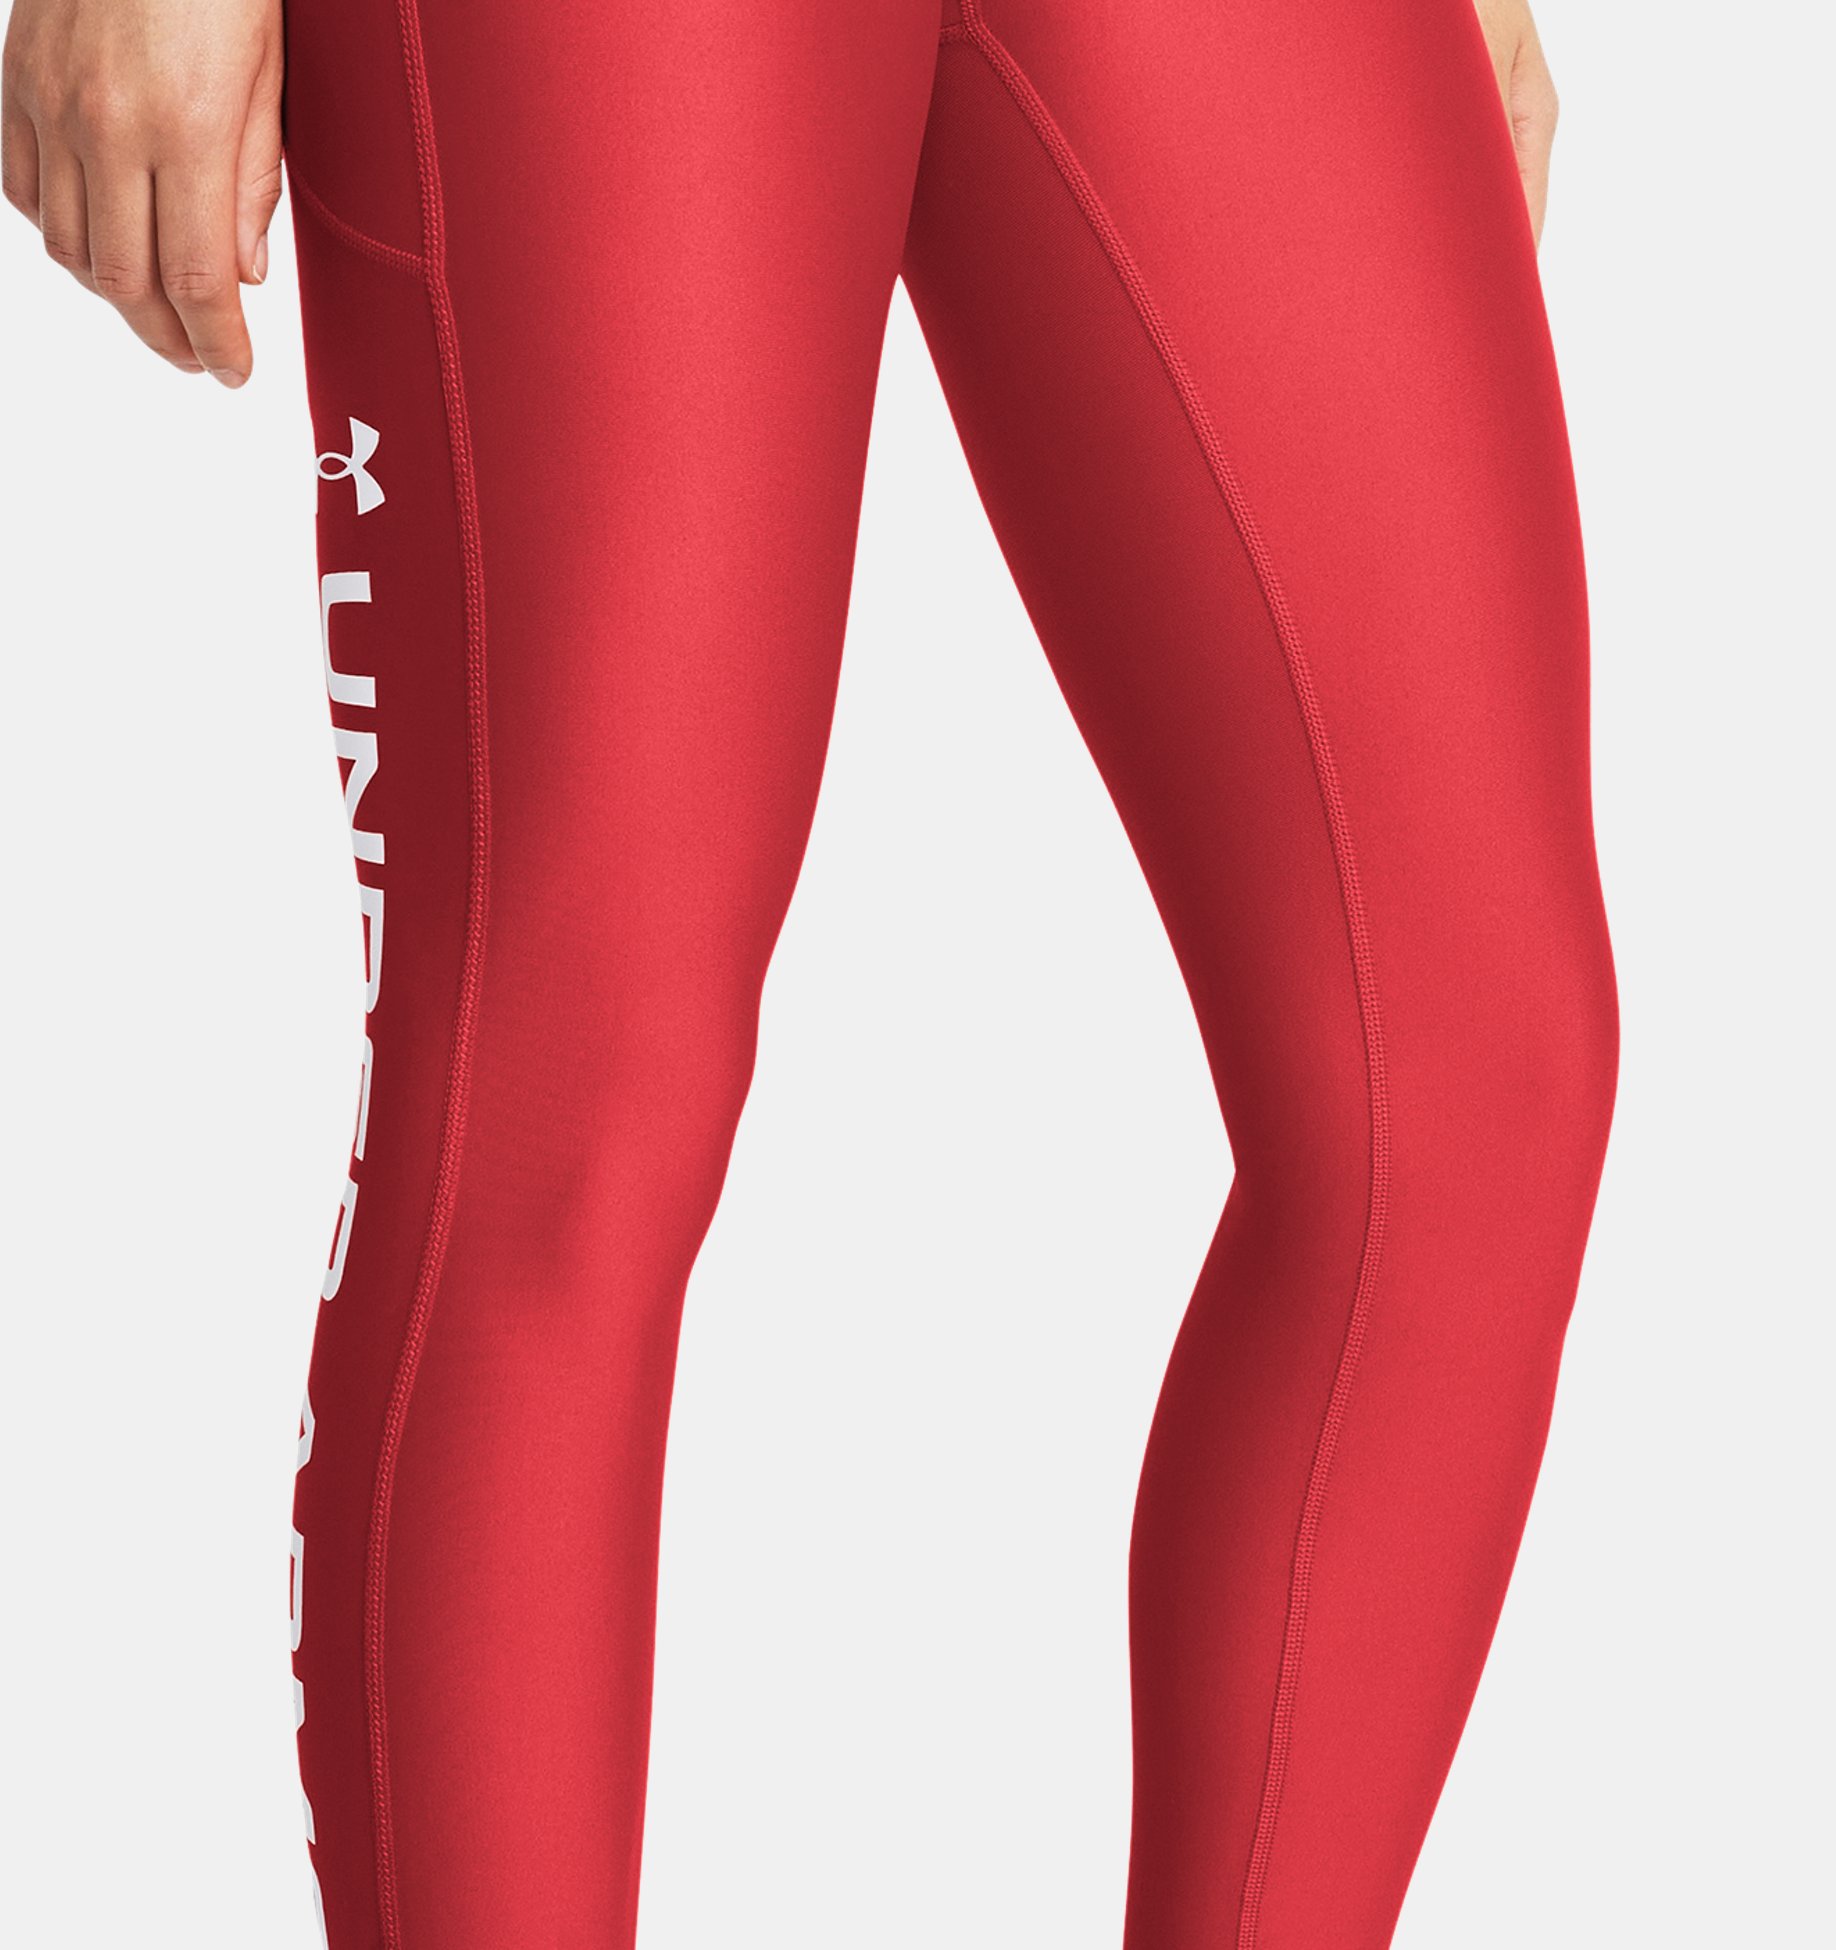 https://underarmour.scene7.com/is/image/Underarmour/V5-1376327-814_FC?rp=standard-0pad|pdpZoomDesktop&scl=0.72&fmt=jpg&qlt=85&resMode=sharp2&cache=on,on&bgc=f0f0f0&wid=1836&hei=1950&size=1500,1500